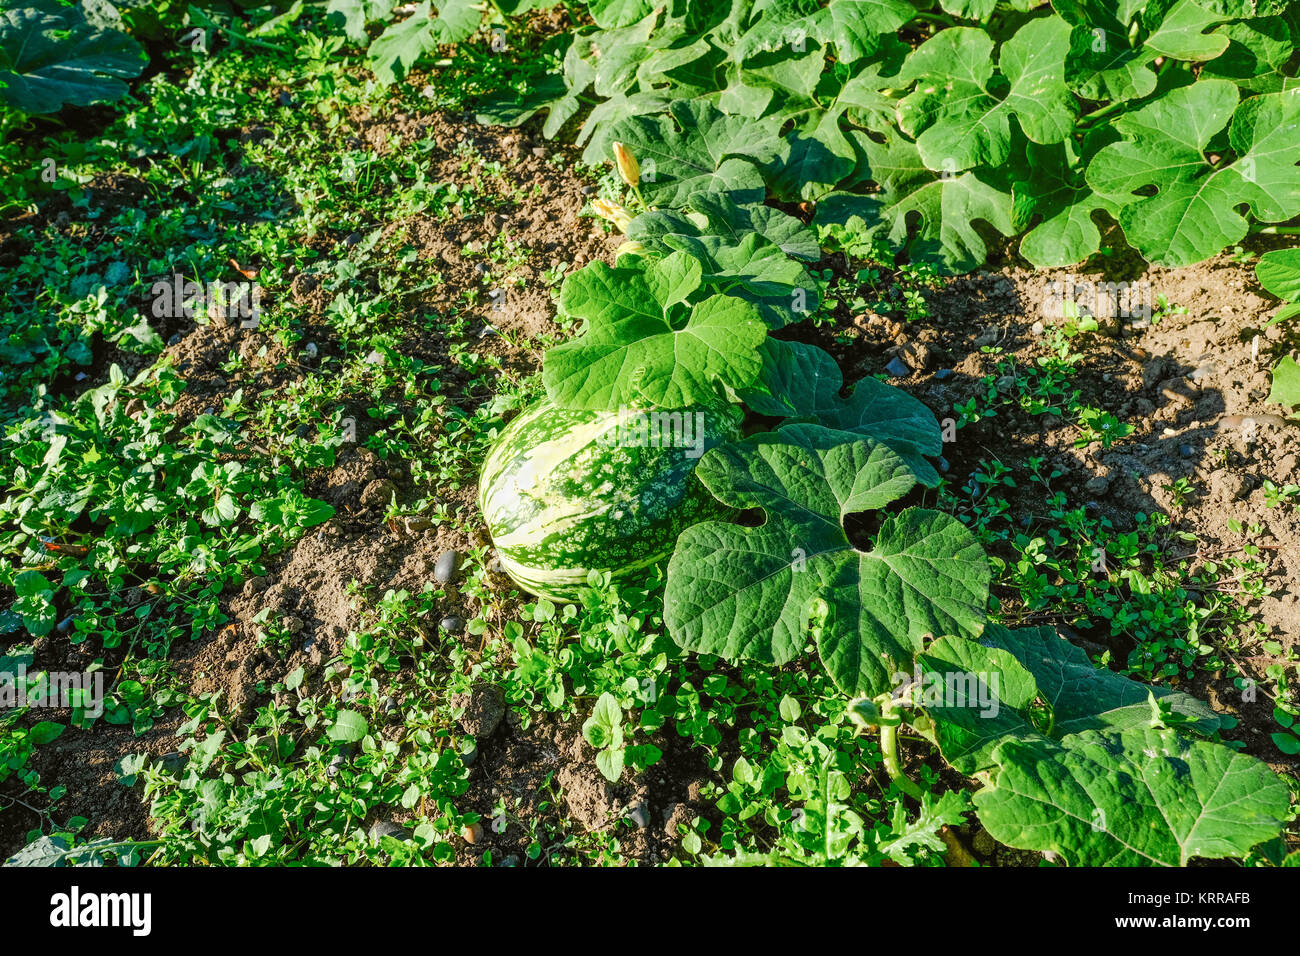 Green marrow growing in the garden.  Single marrow ready to harvest in this autumn shot. Stock Photo